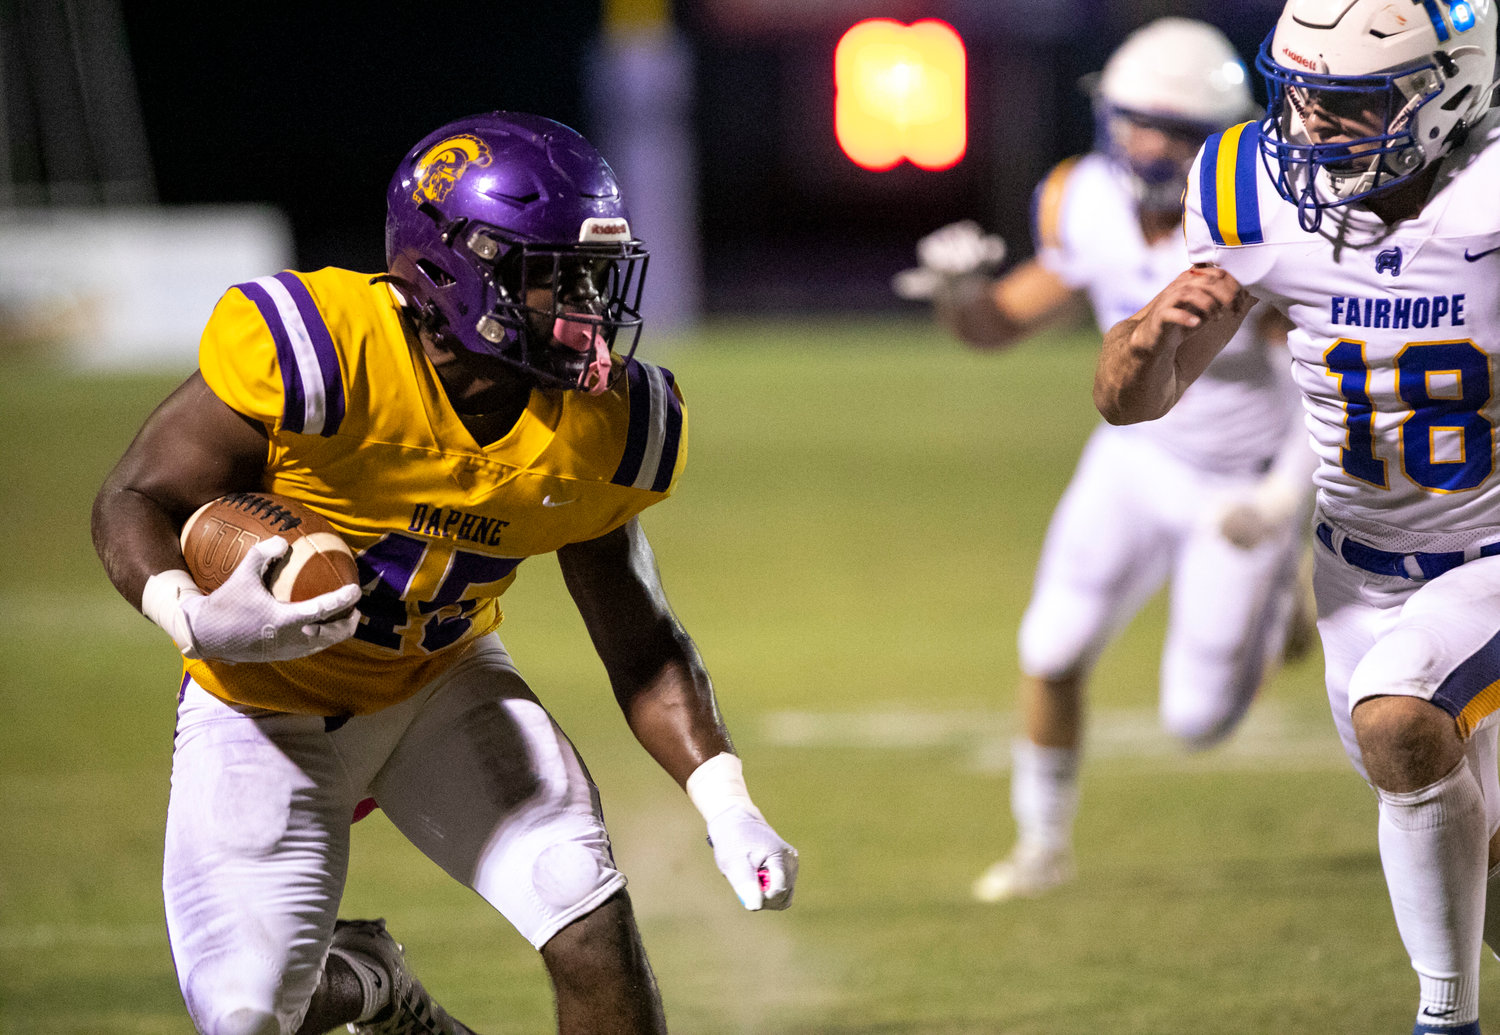 Daphne’s Nick Clark finishes a first-half run against the Fairhope Pirates in region action Oct. 7 at home. Clark eclipsed 1,000 yards rushing and was an all-state honorable mention in his senior season.